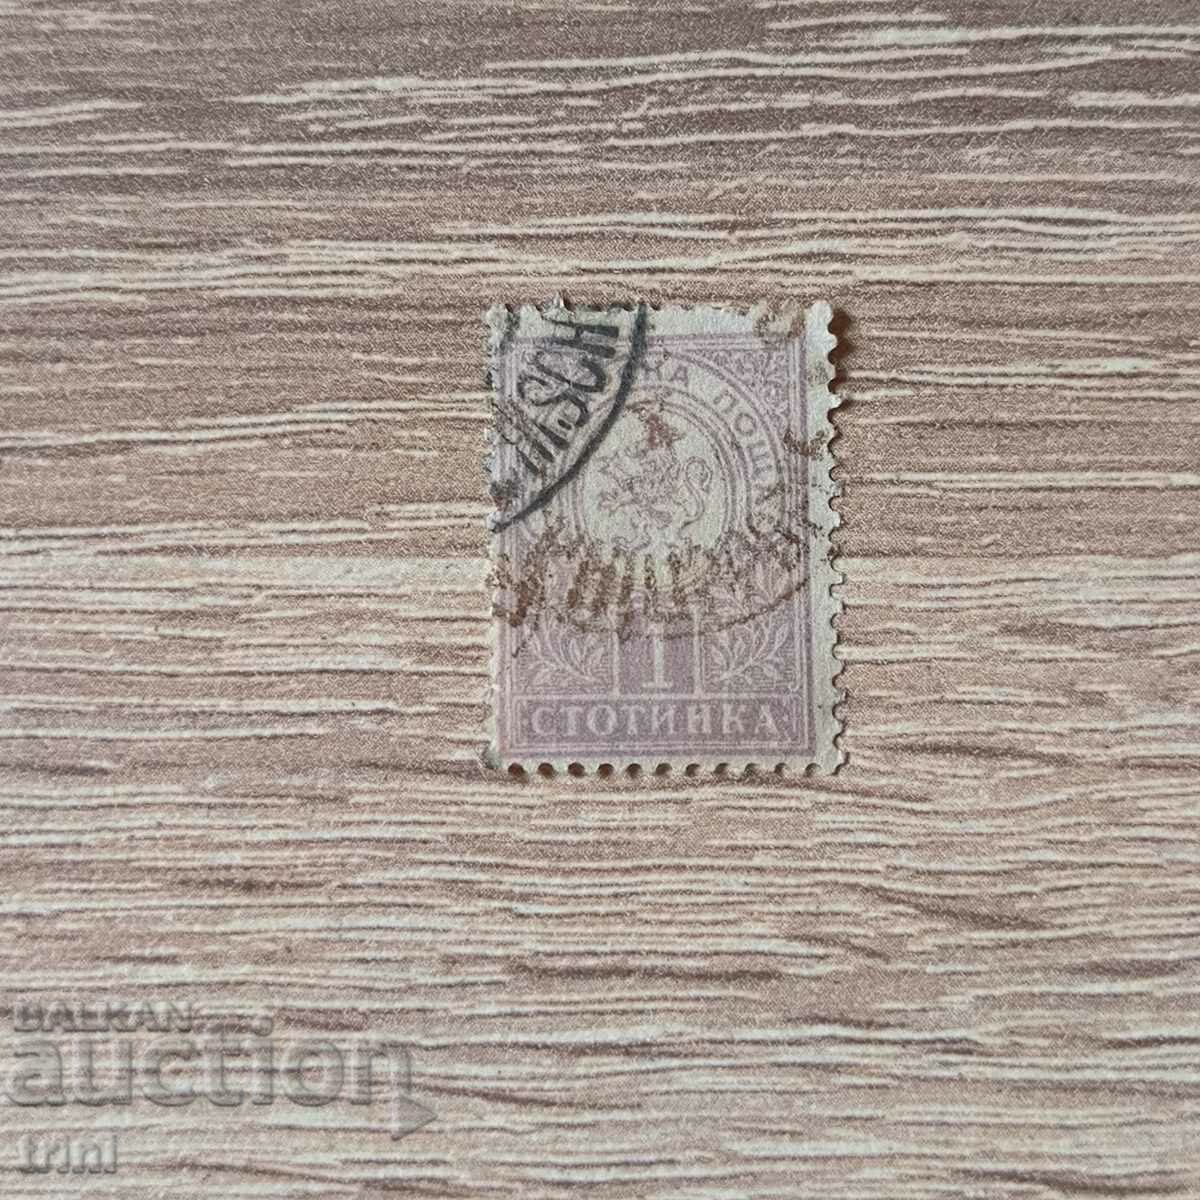 Small Lion 1889 1 cent